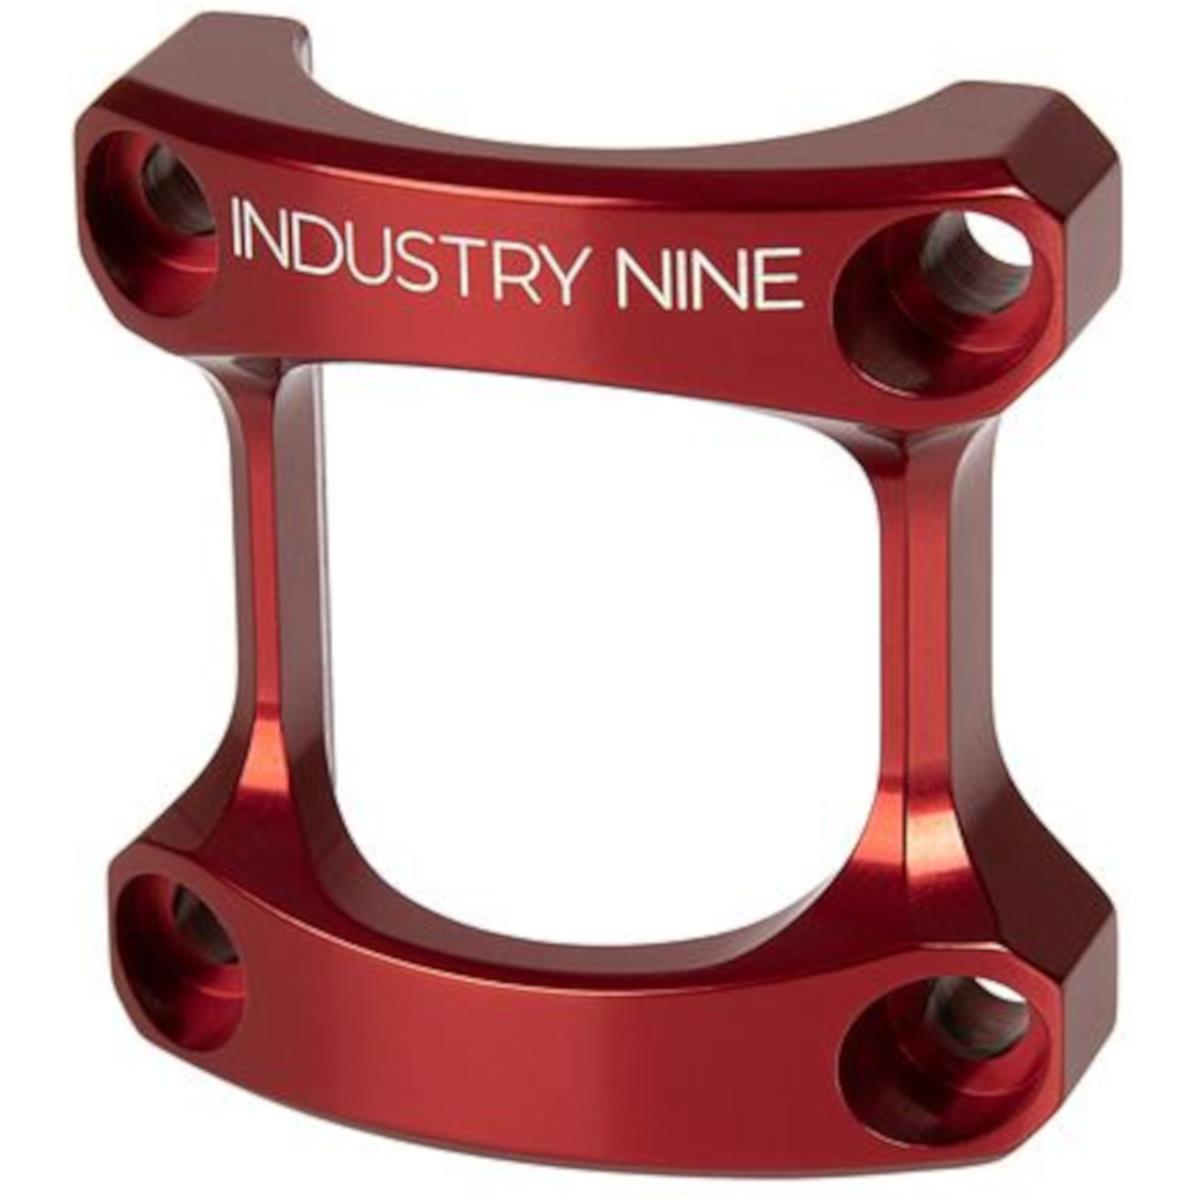 Industry Nine Stem Faceplate  for A318 Stems, Red